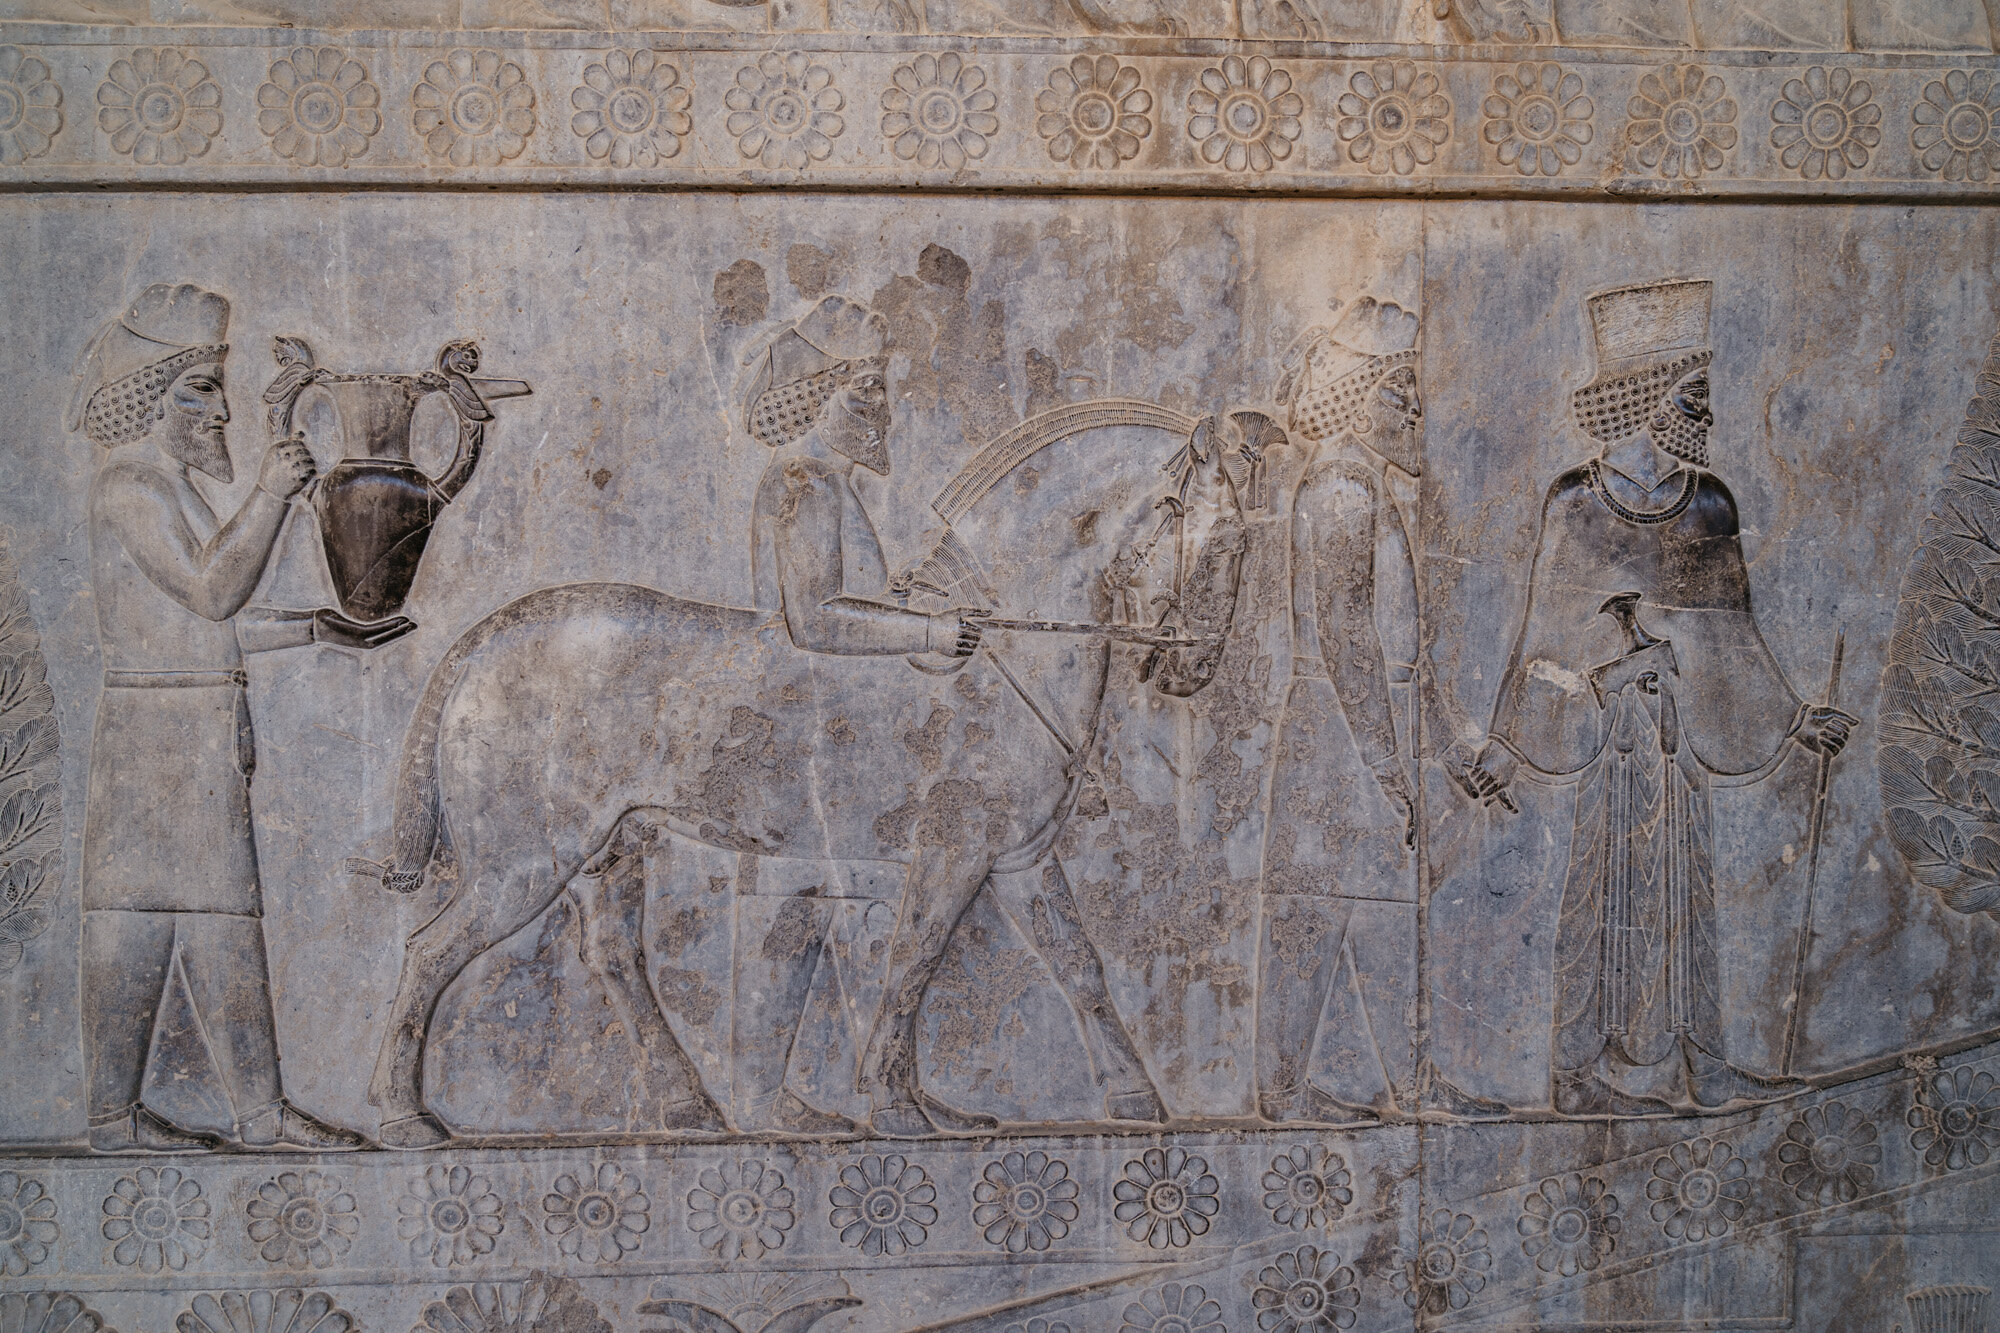  Bas reliefs that depict an Armenia delegations bringing tribute - a jar decorated with winged griffins - to the Achaemenid kings 